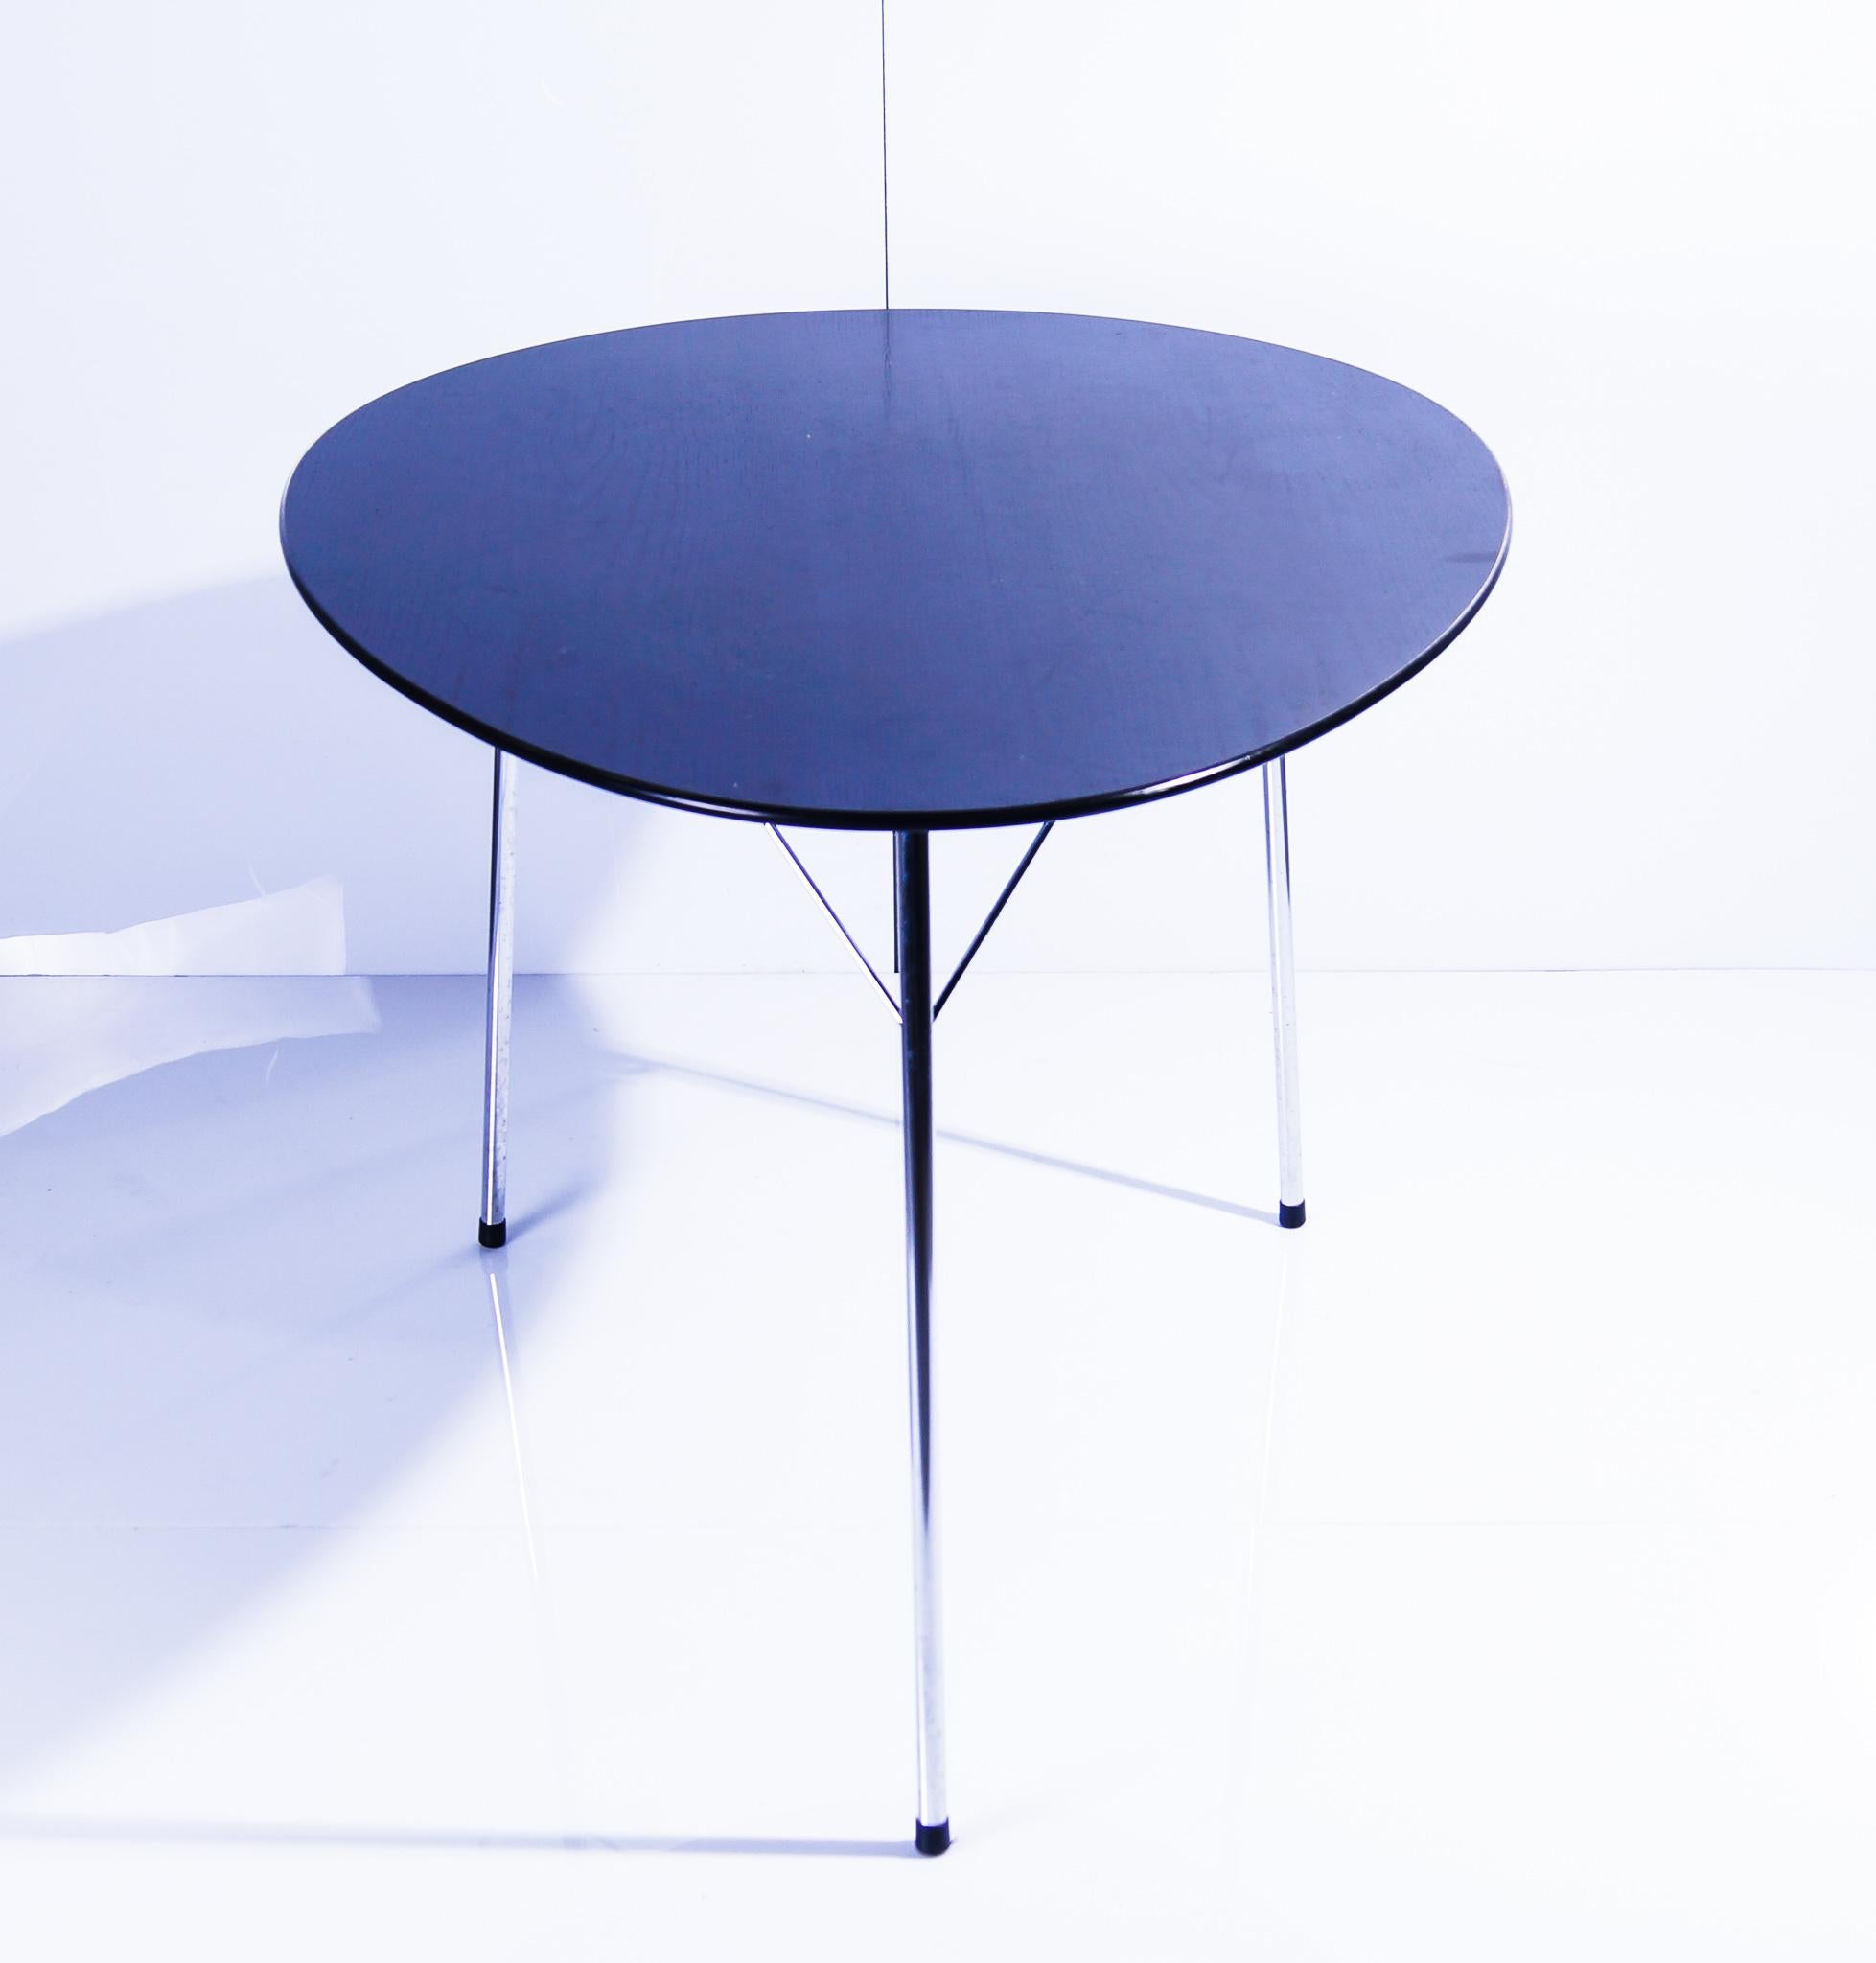 Contemporary Arne Jacobsen, Oval Tapered-Shaped Table, Model 3603